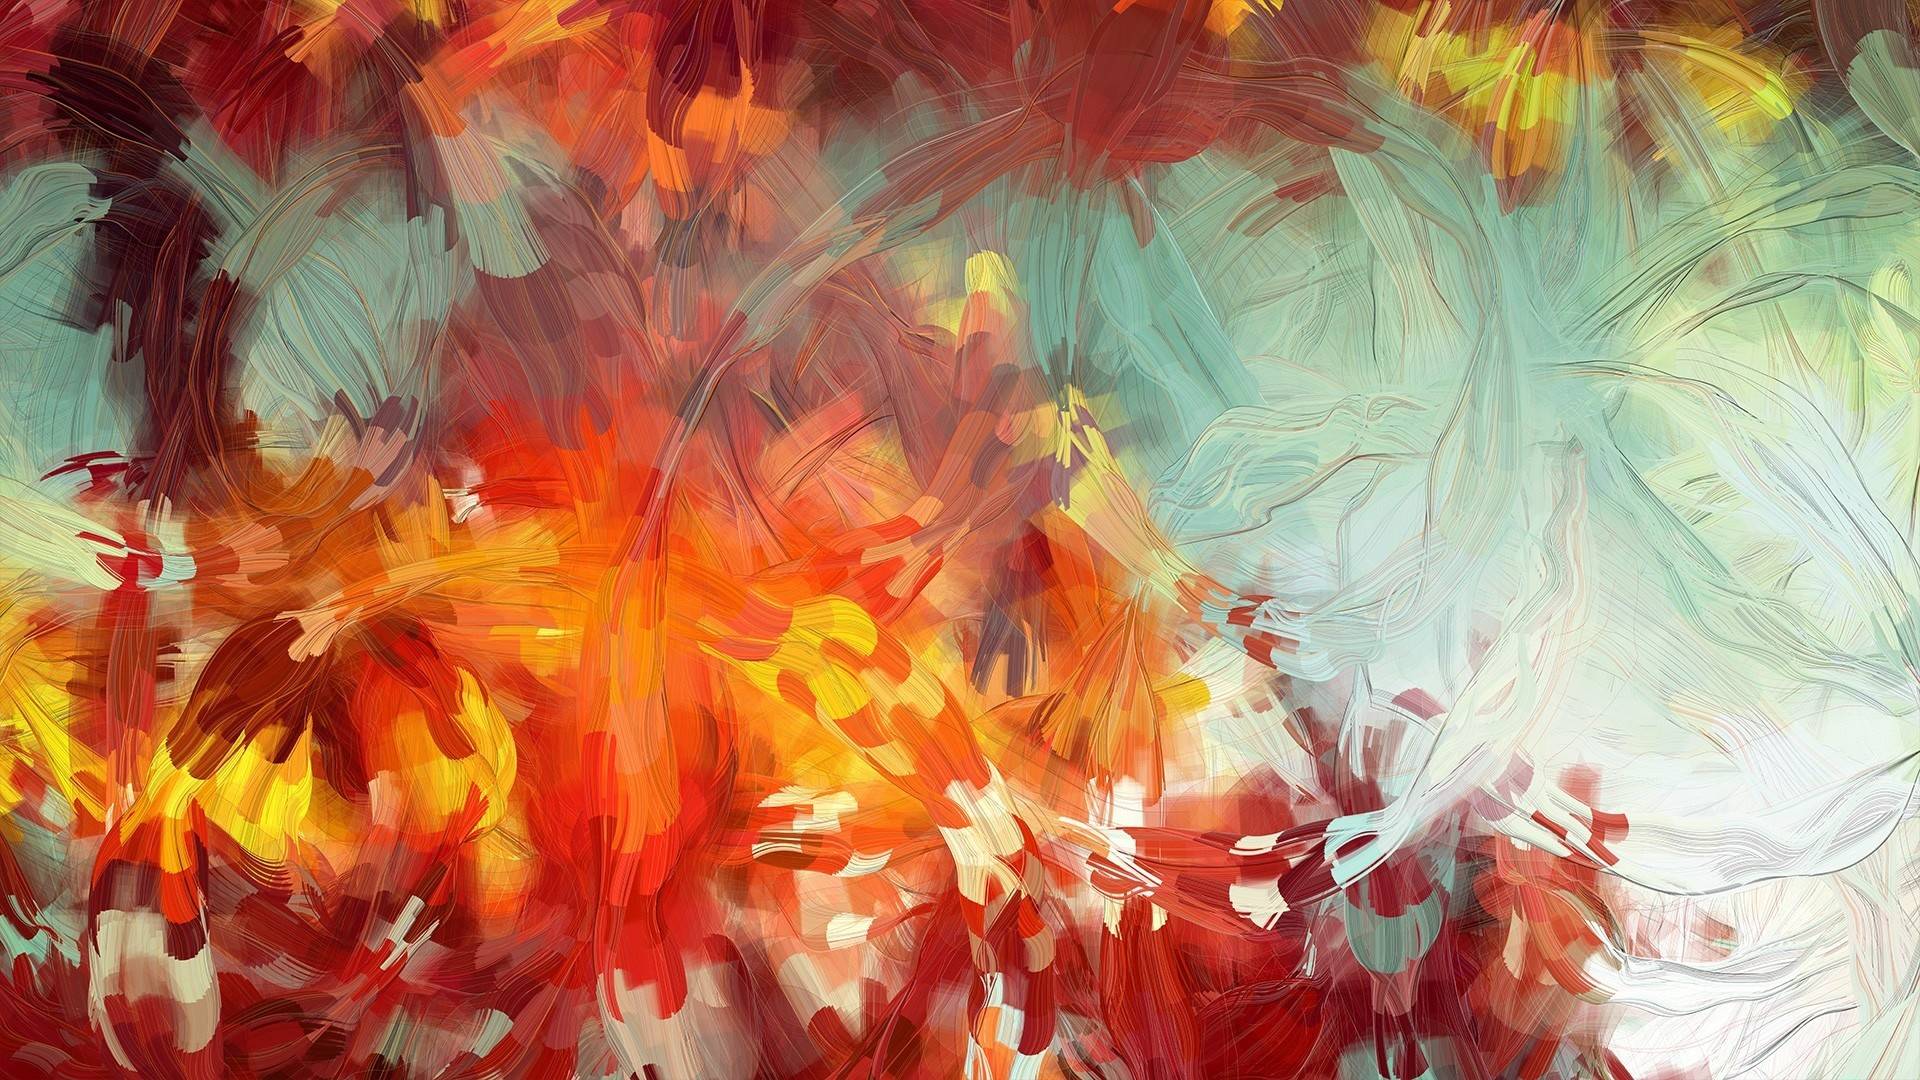 Abstract Art 2020 Wallpapers